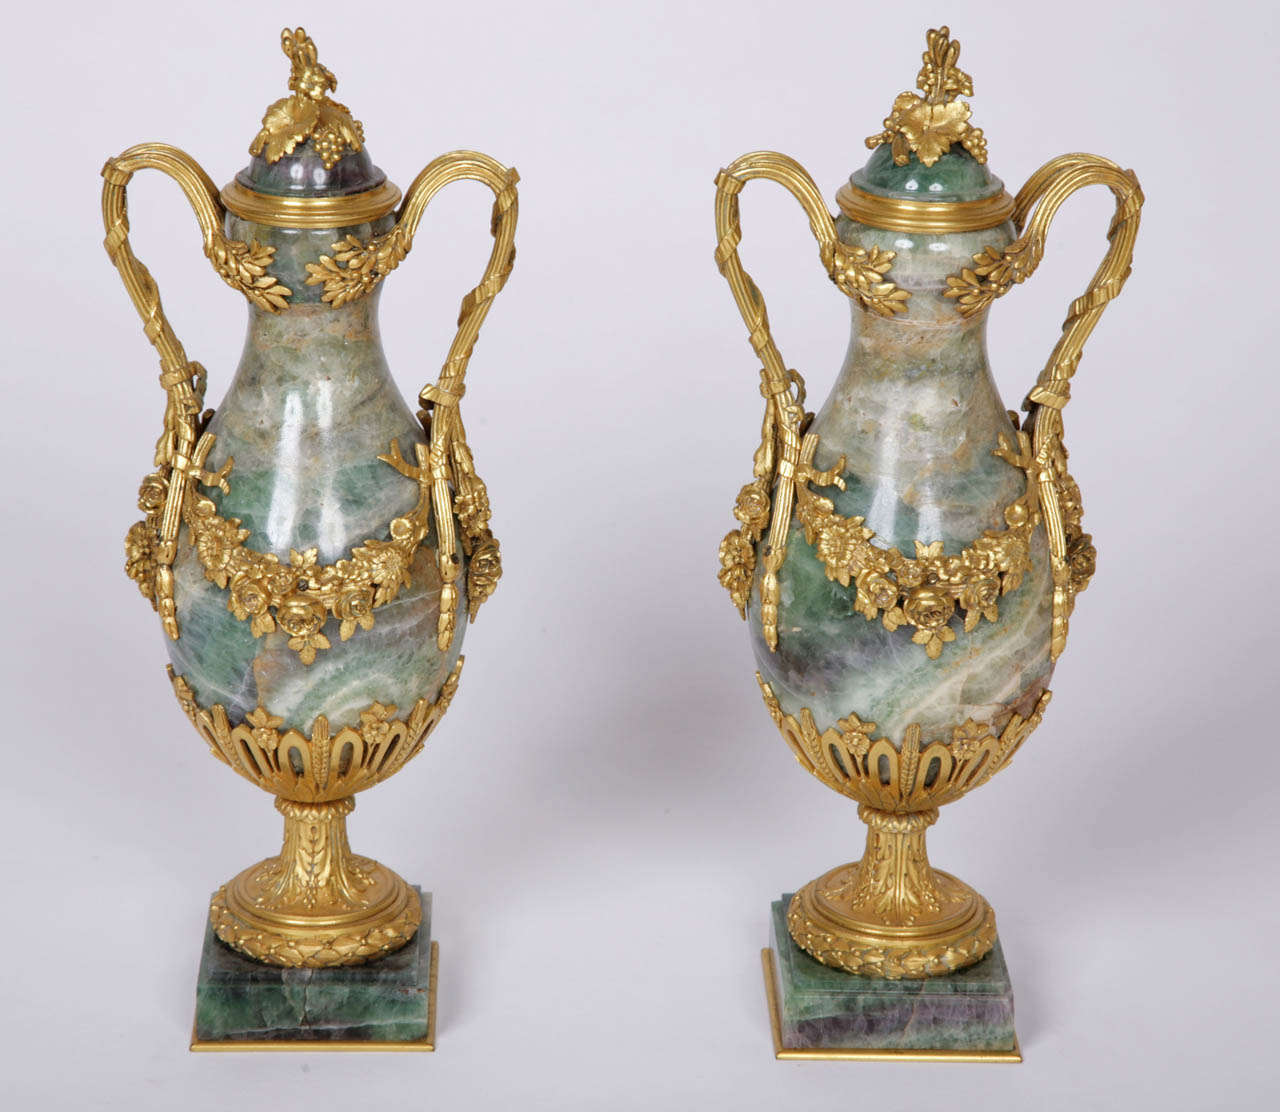 The baluster form fluorspar vases on square pedestals, decorated with ormolu mounts in the form of twin-handles and garlands of flowers and grapes